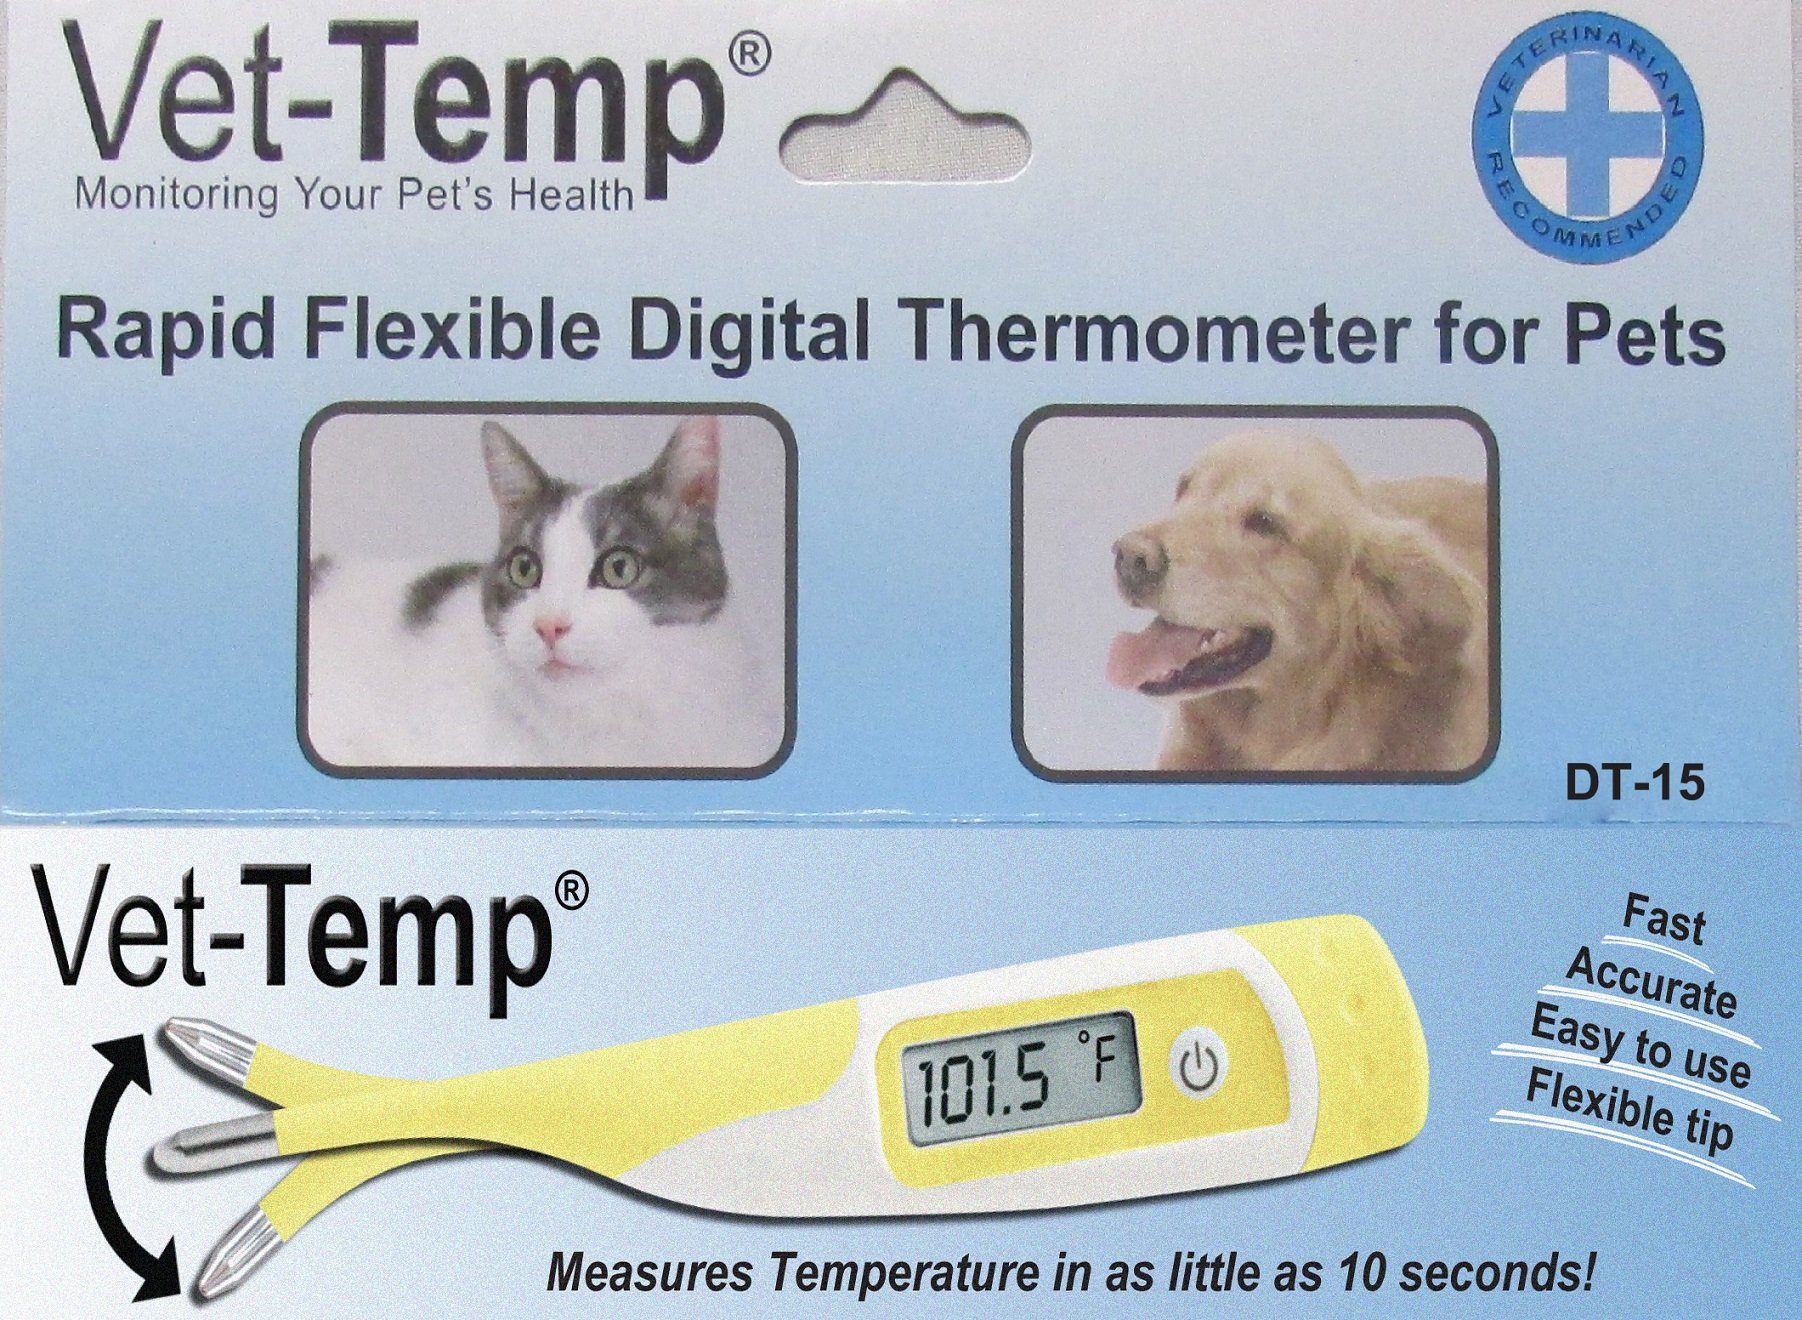 Pet Thermometer For Accurate Fever Detection, Suitable For Cats